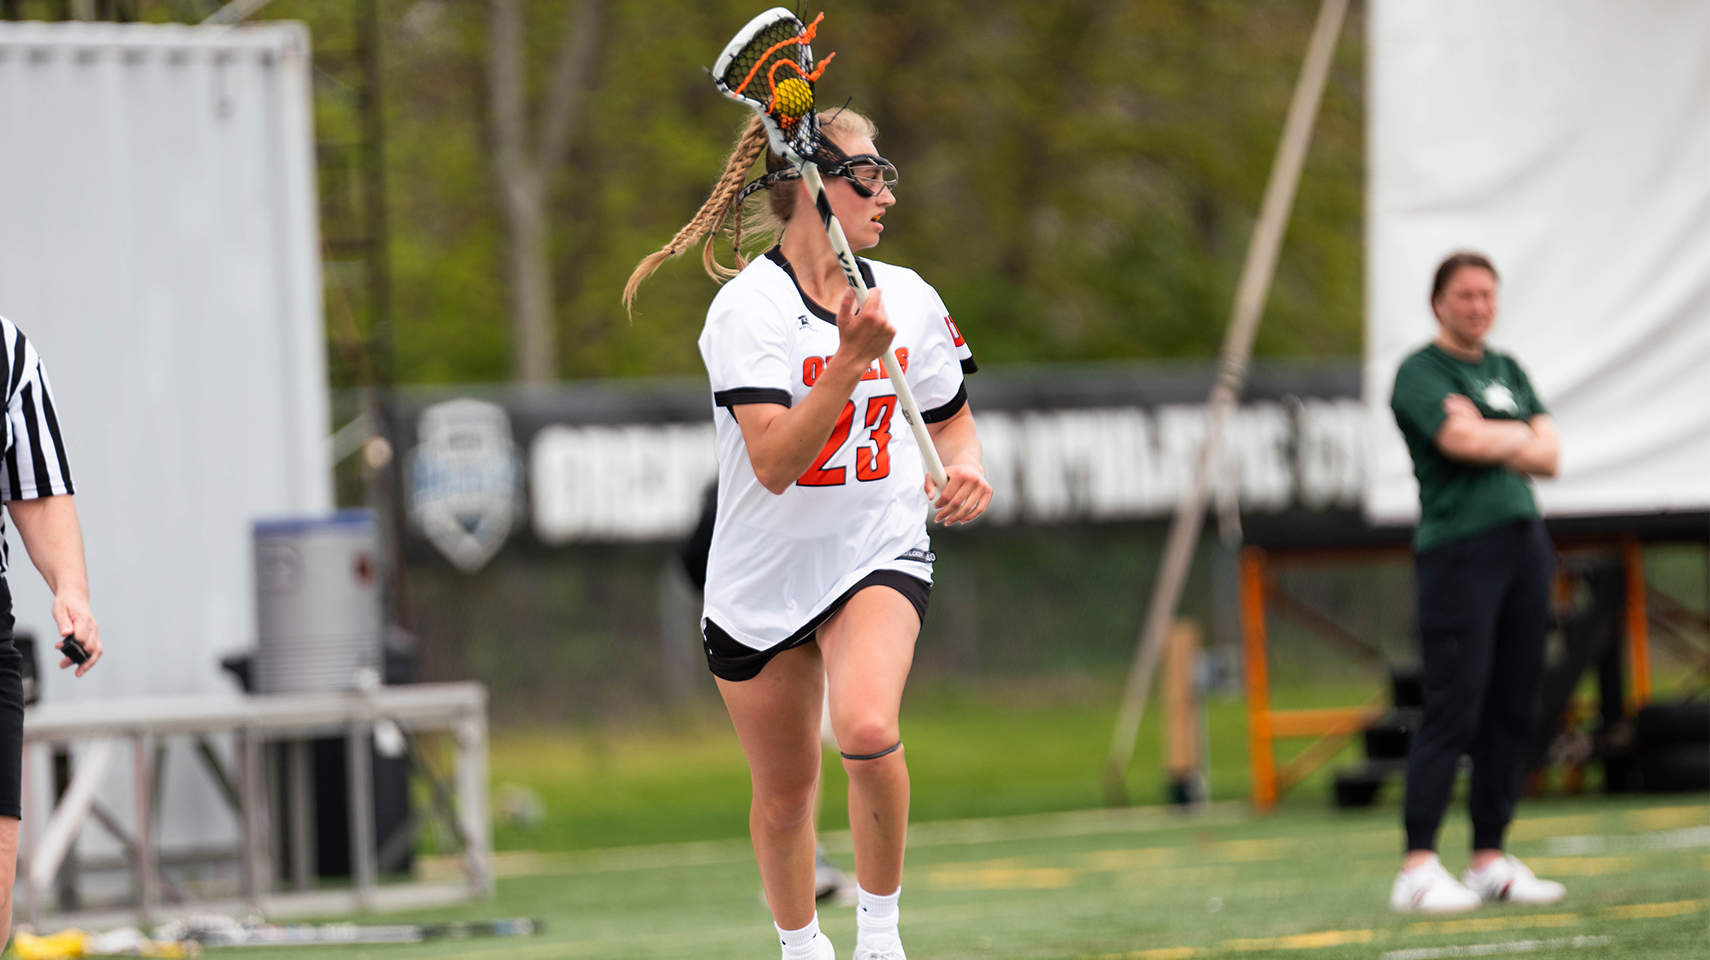 Women's lacrosse player running down the field with the ball